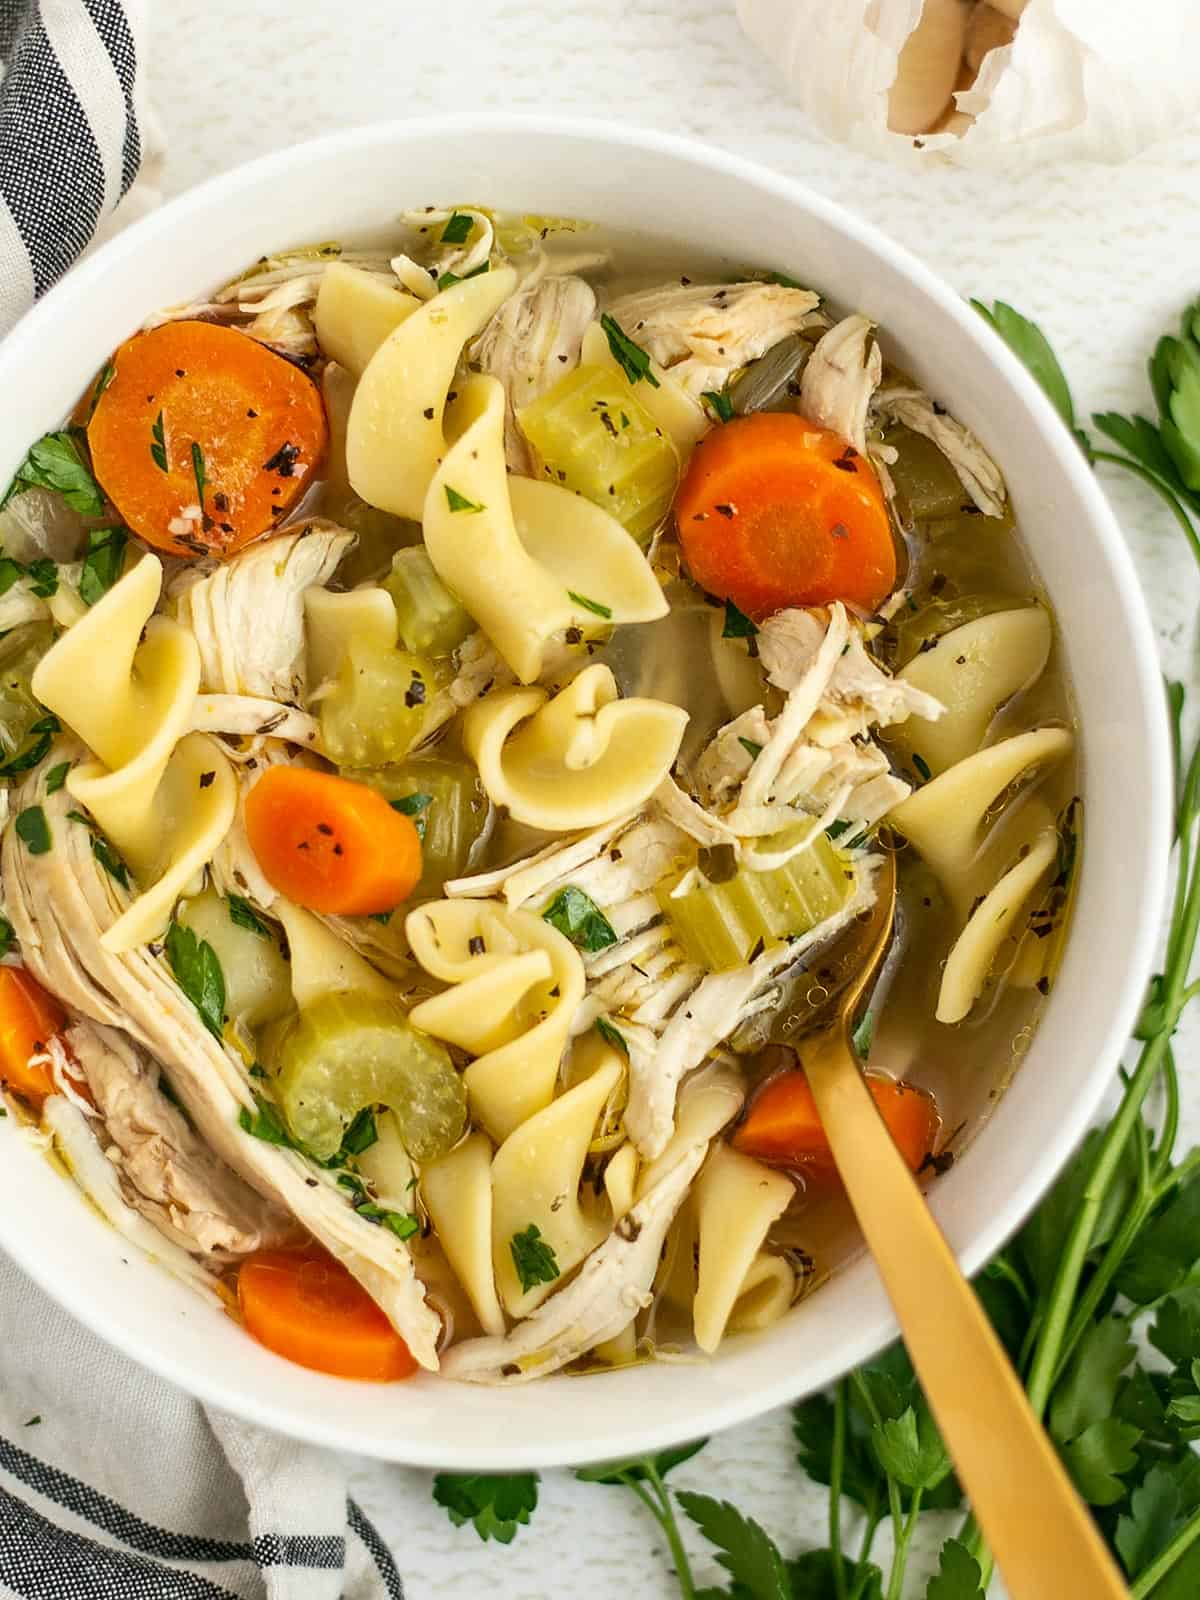 Chicken and Noodles Recipe - How to Make Homemade Chicken Noodle Soup